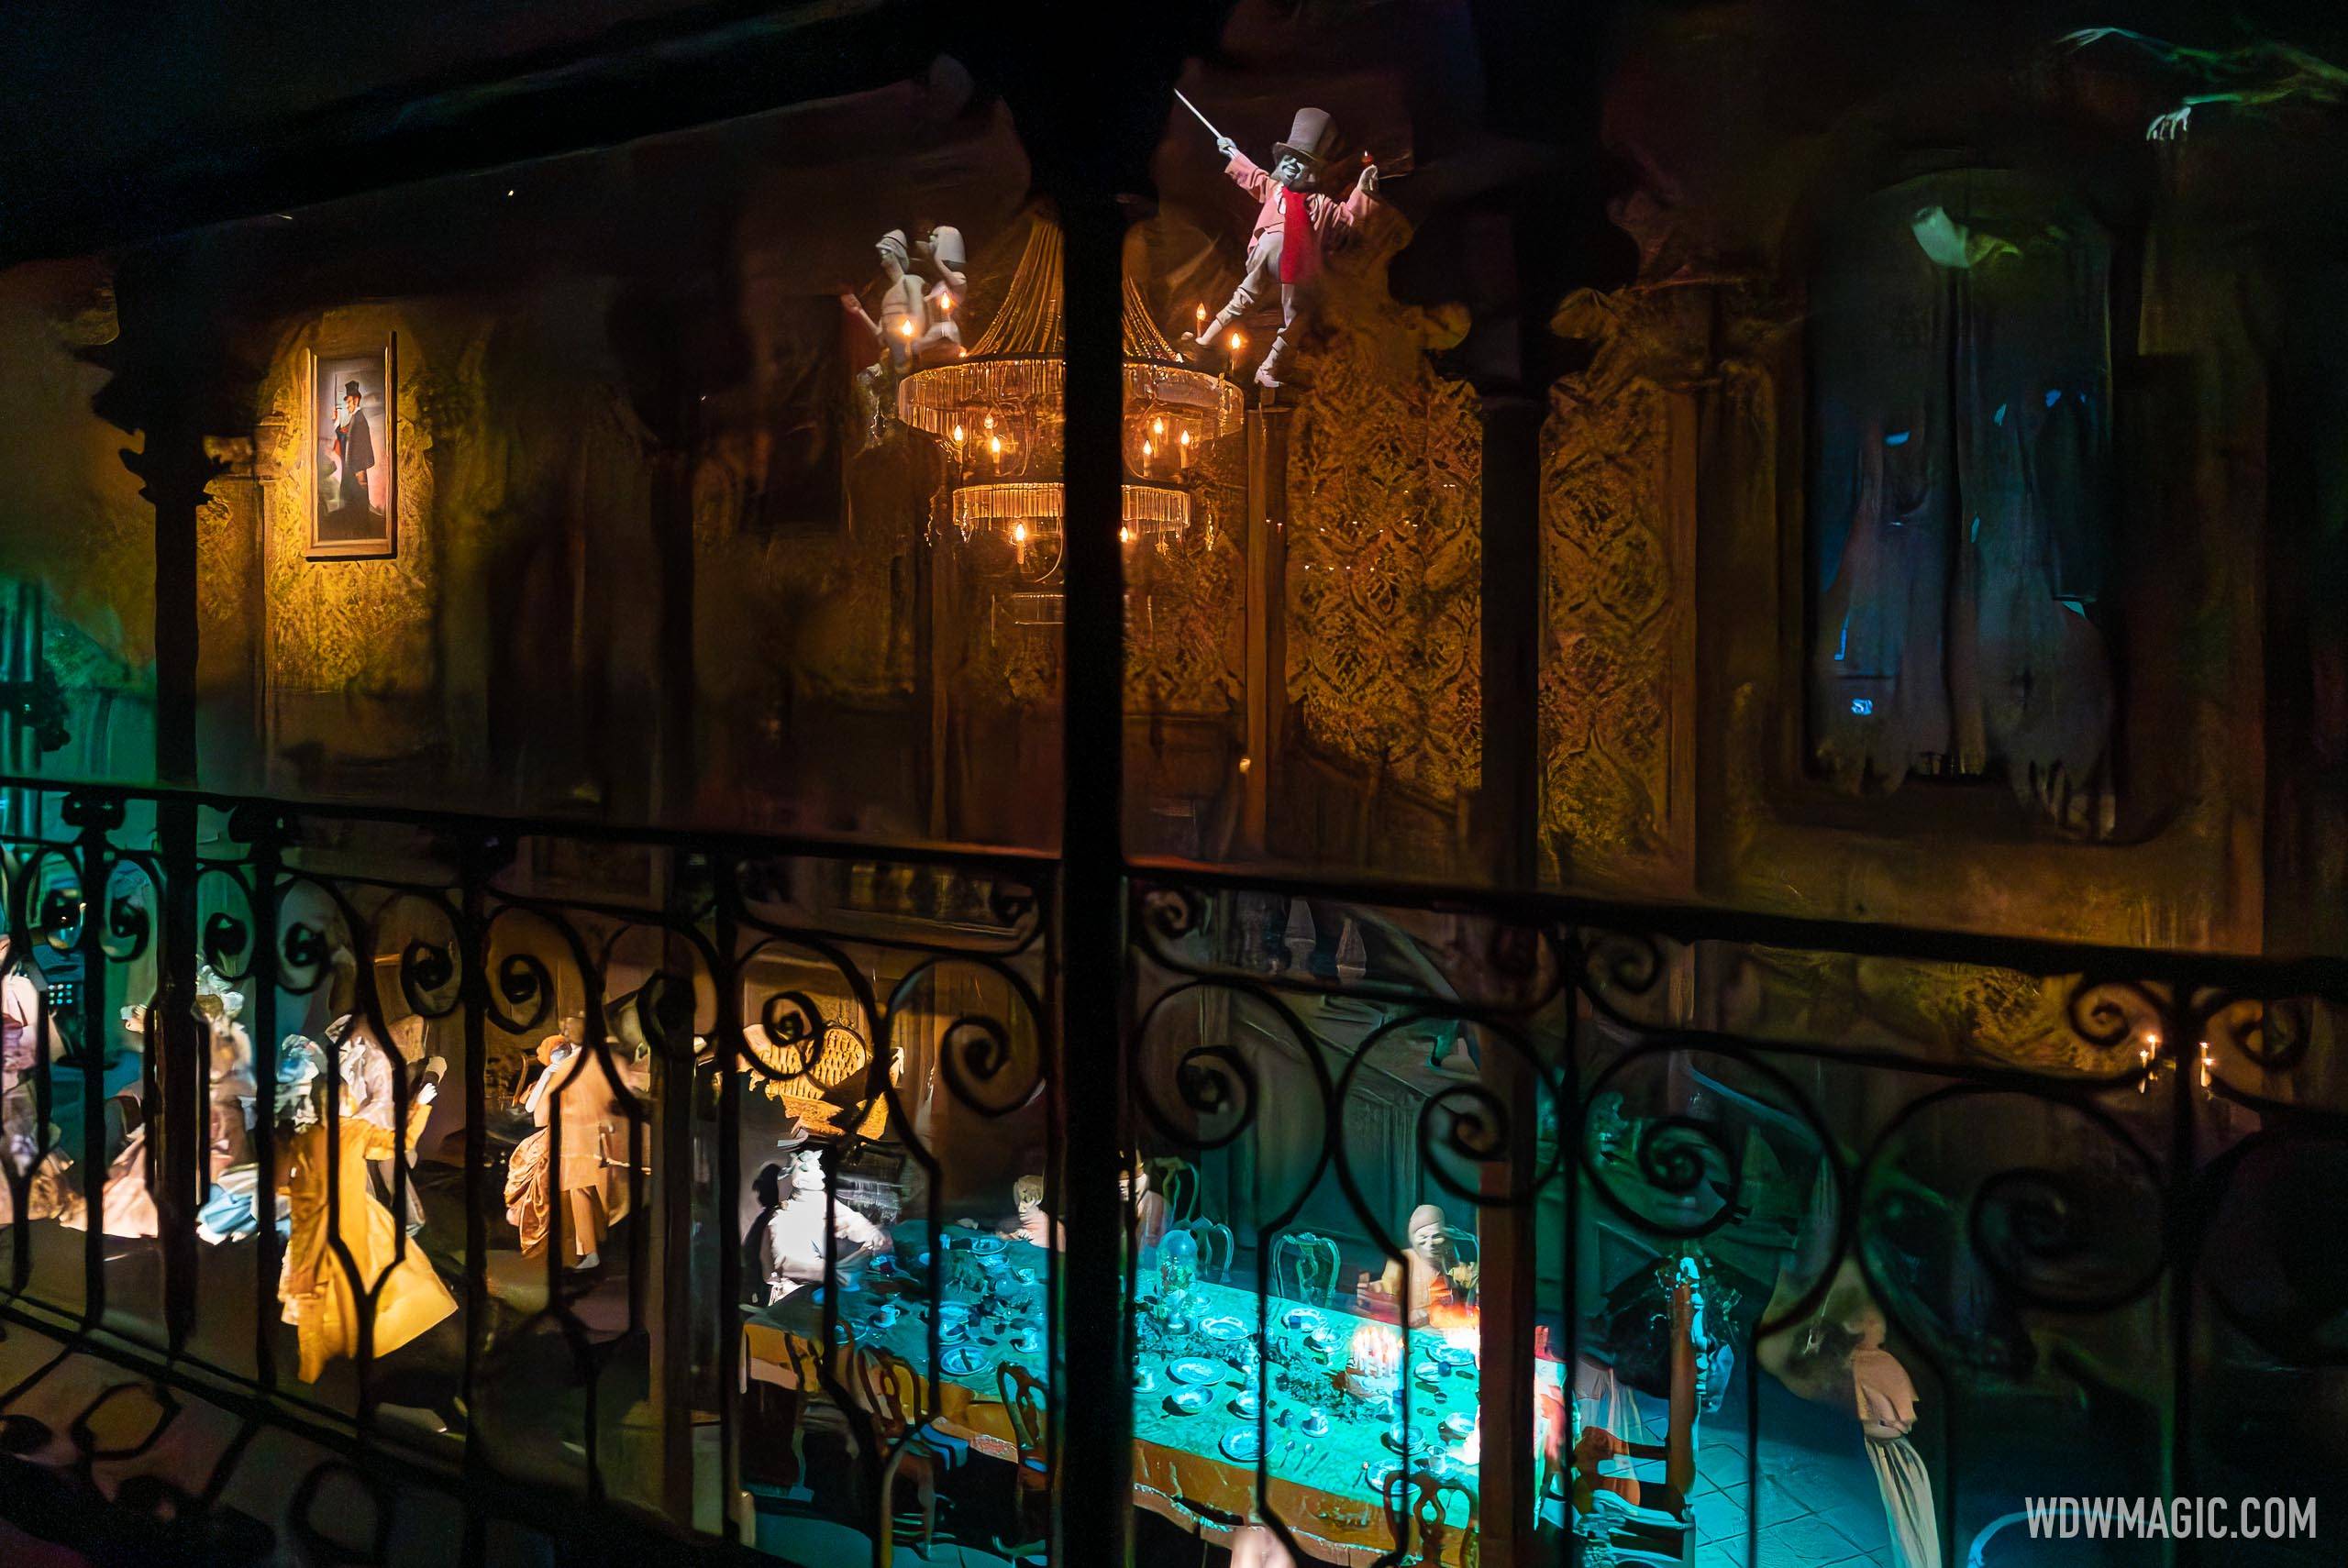 Update on the new Haunted Mansion hitchhiking ghosts scene